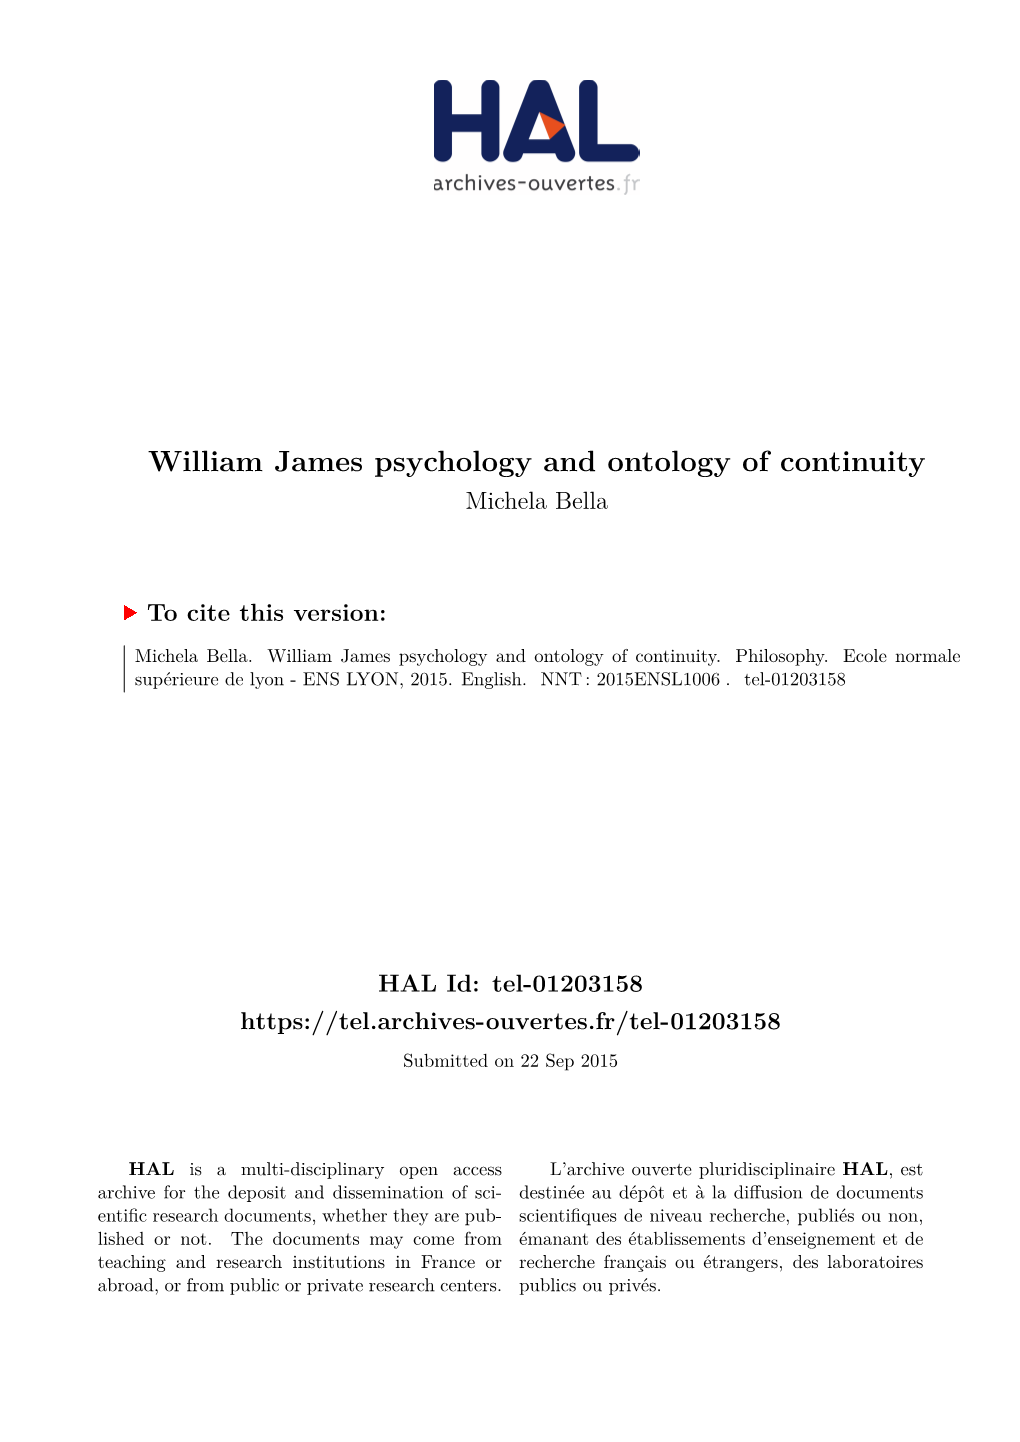 William James Psychology and Ontology of Continuity Michela Bella